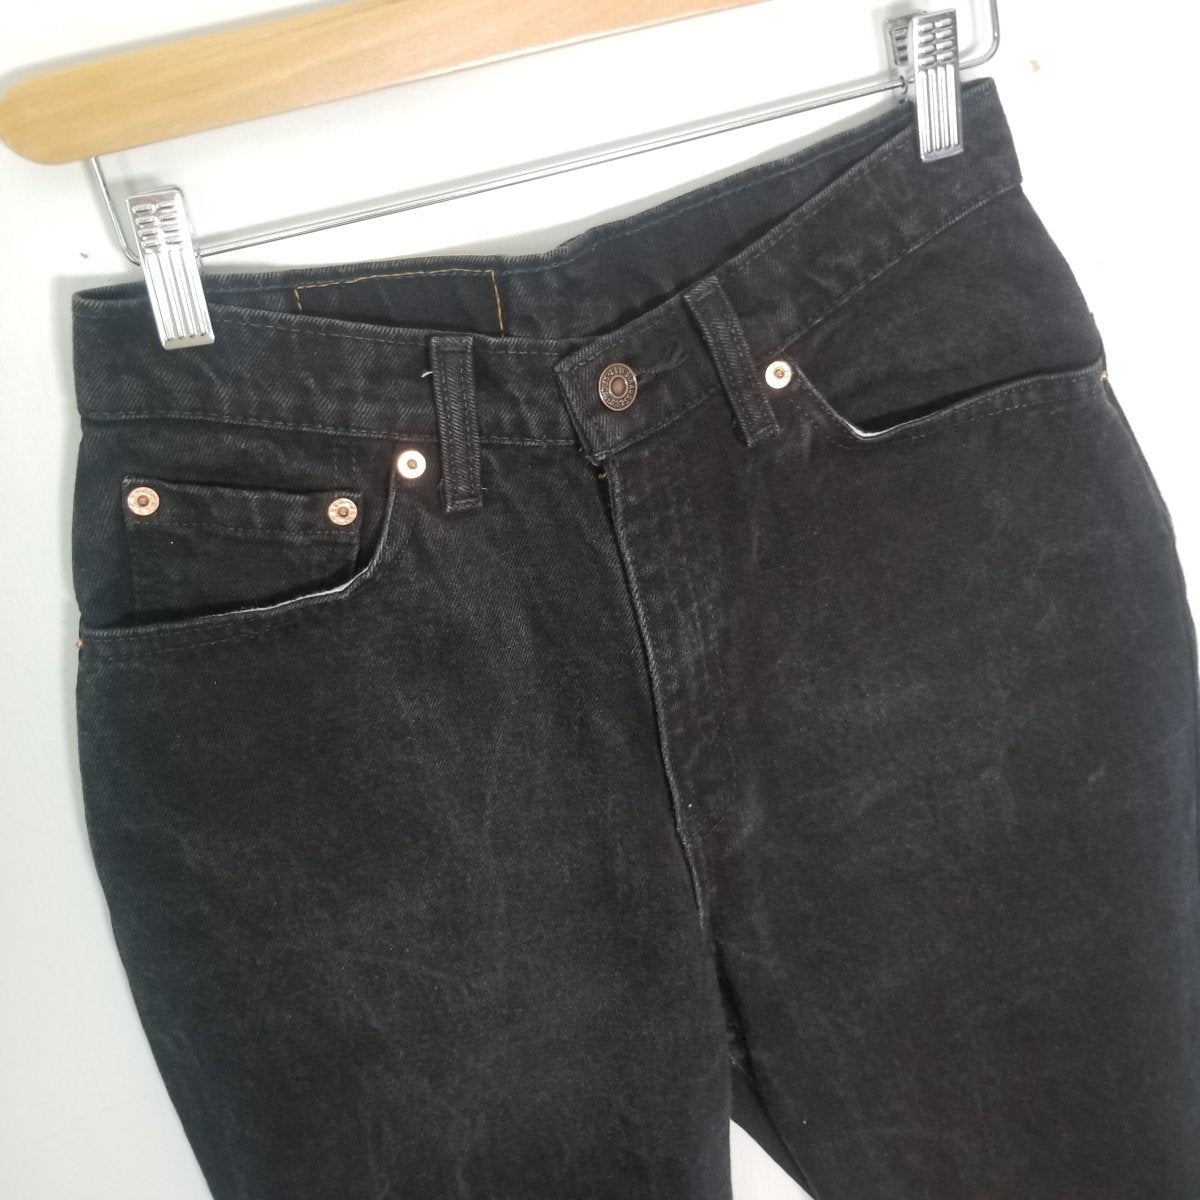 80s/90s Levi's 512 Slim & Tapered - Black Stone Wash 28x32 - themallvintage The Mall Vintage